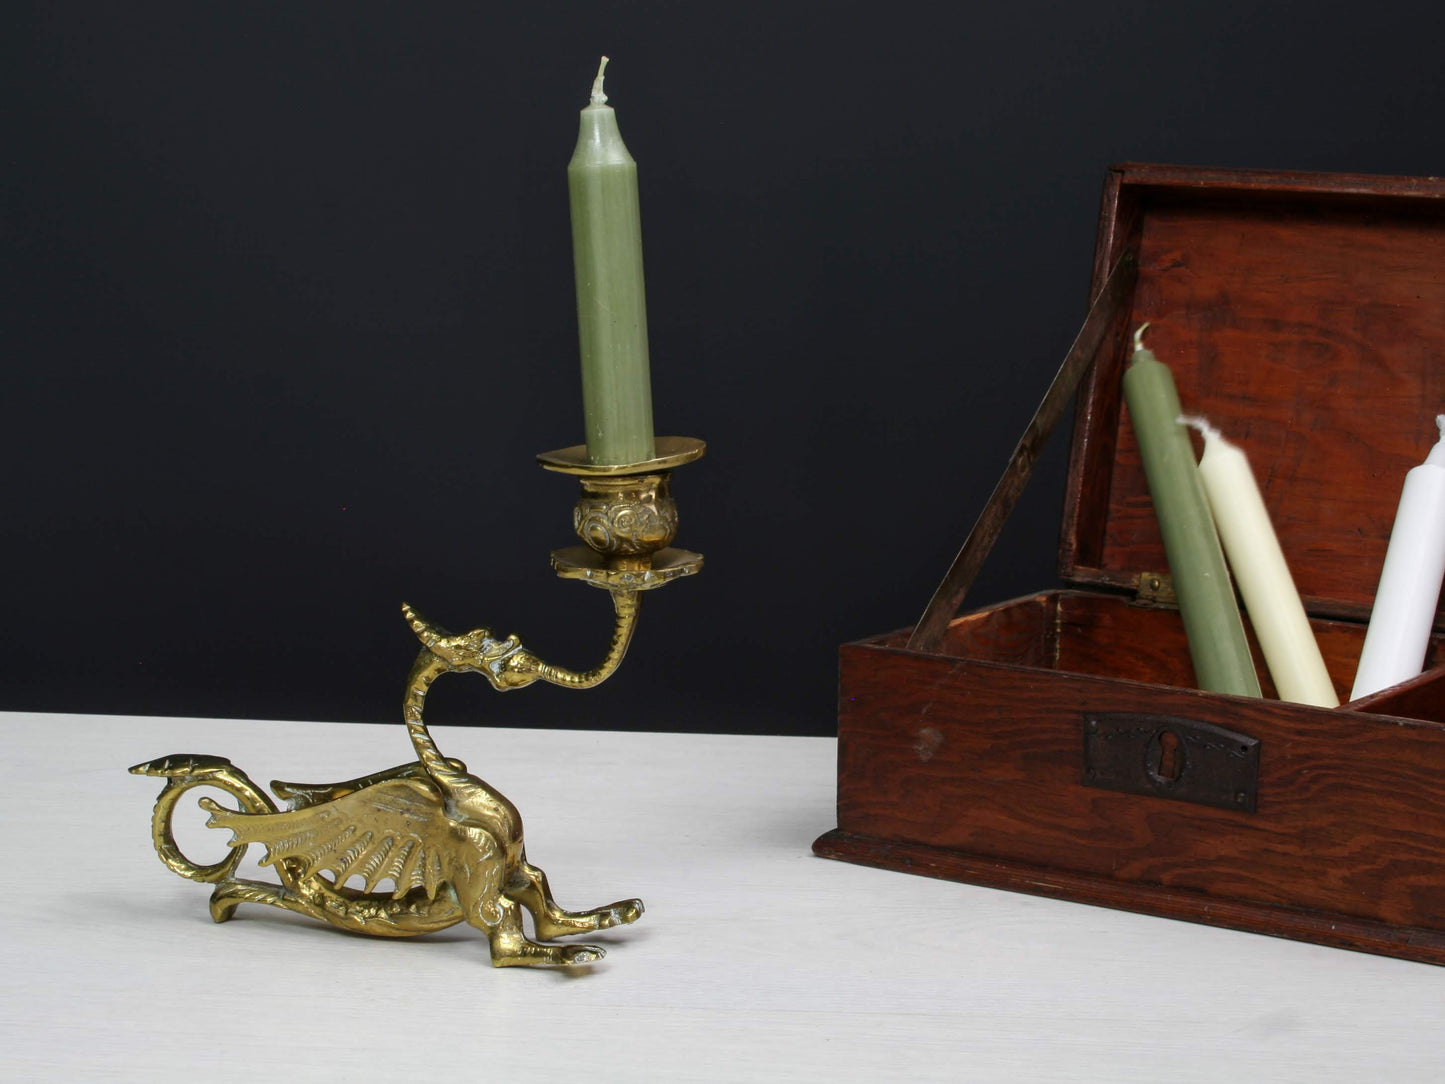 French Antique Candle Holder - Dragon Decor